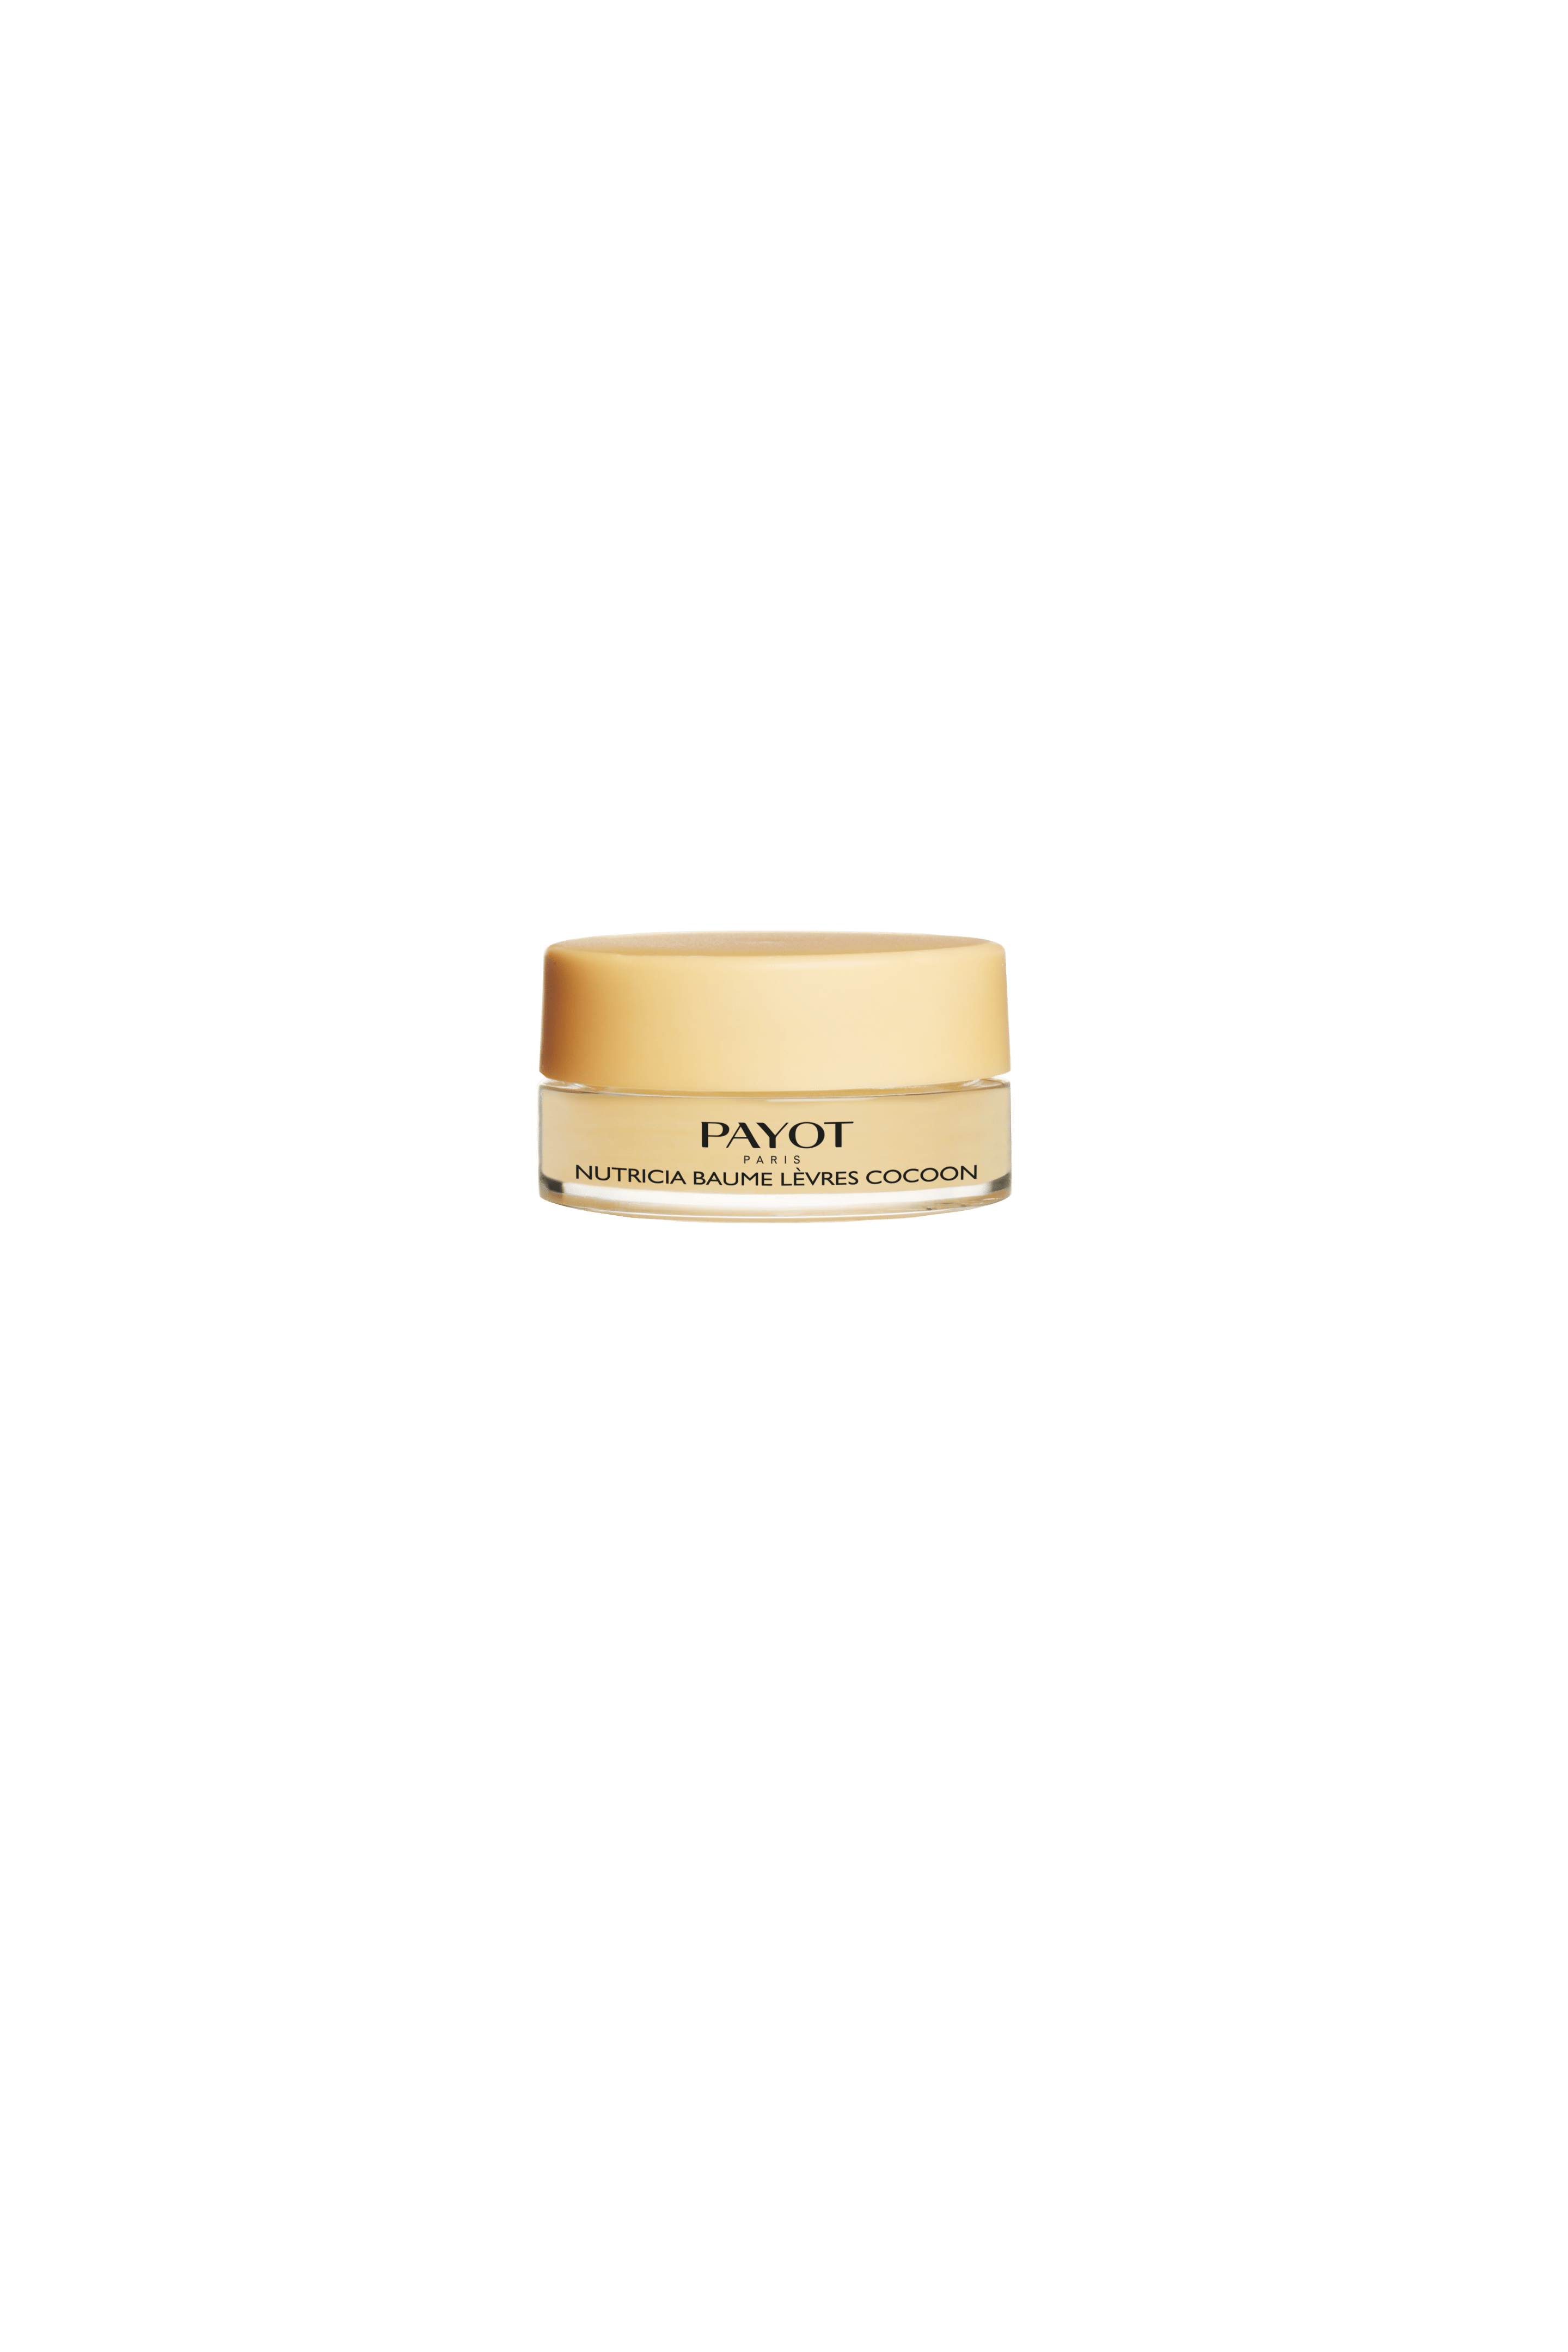 PAYOT Nutrica Baume Levres Cocoon